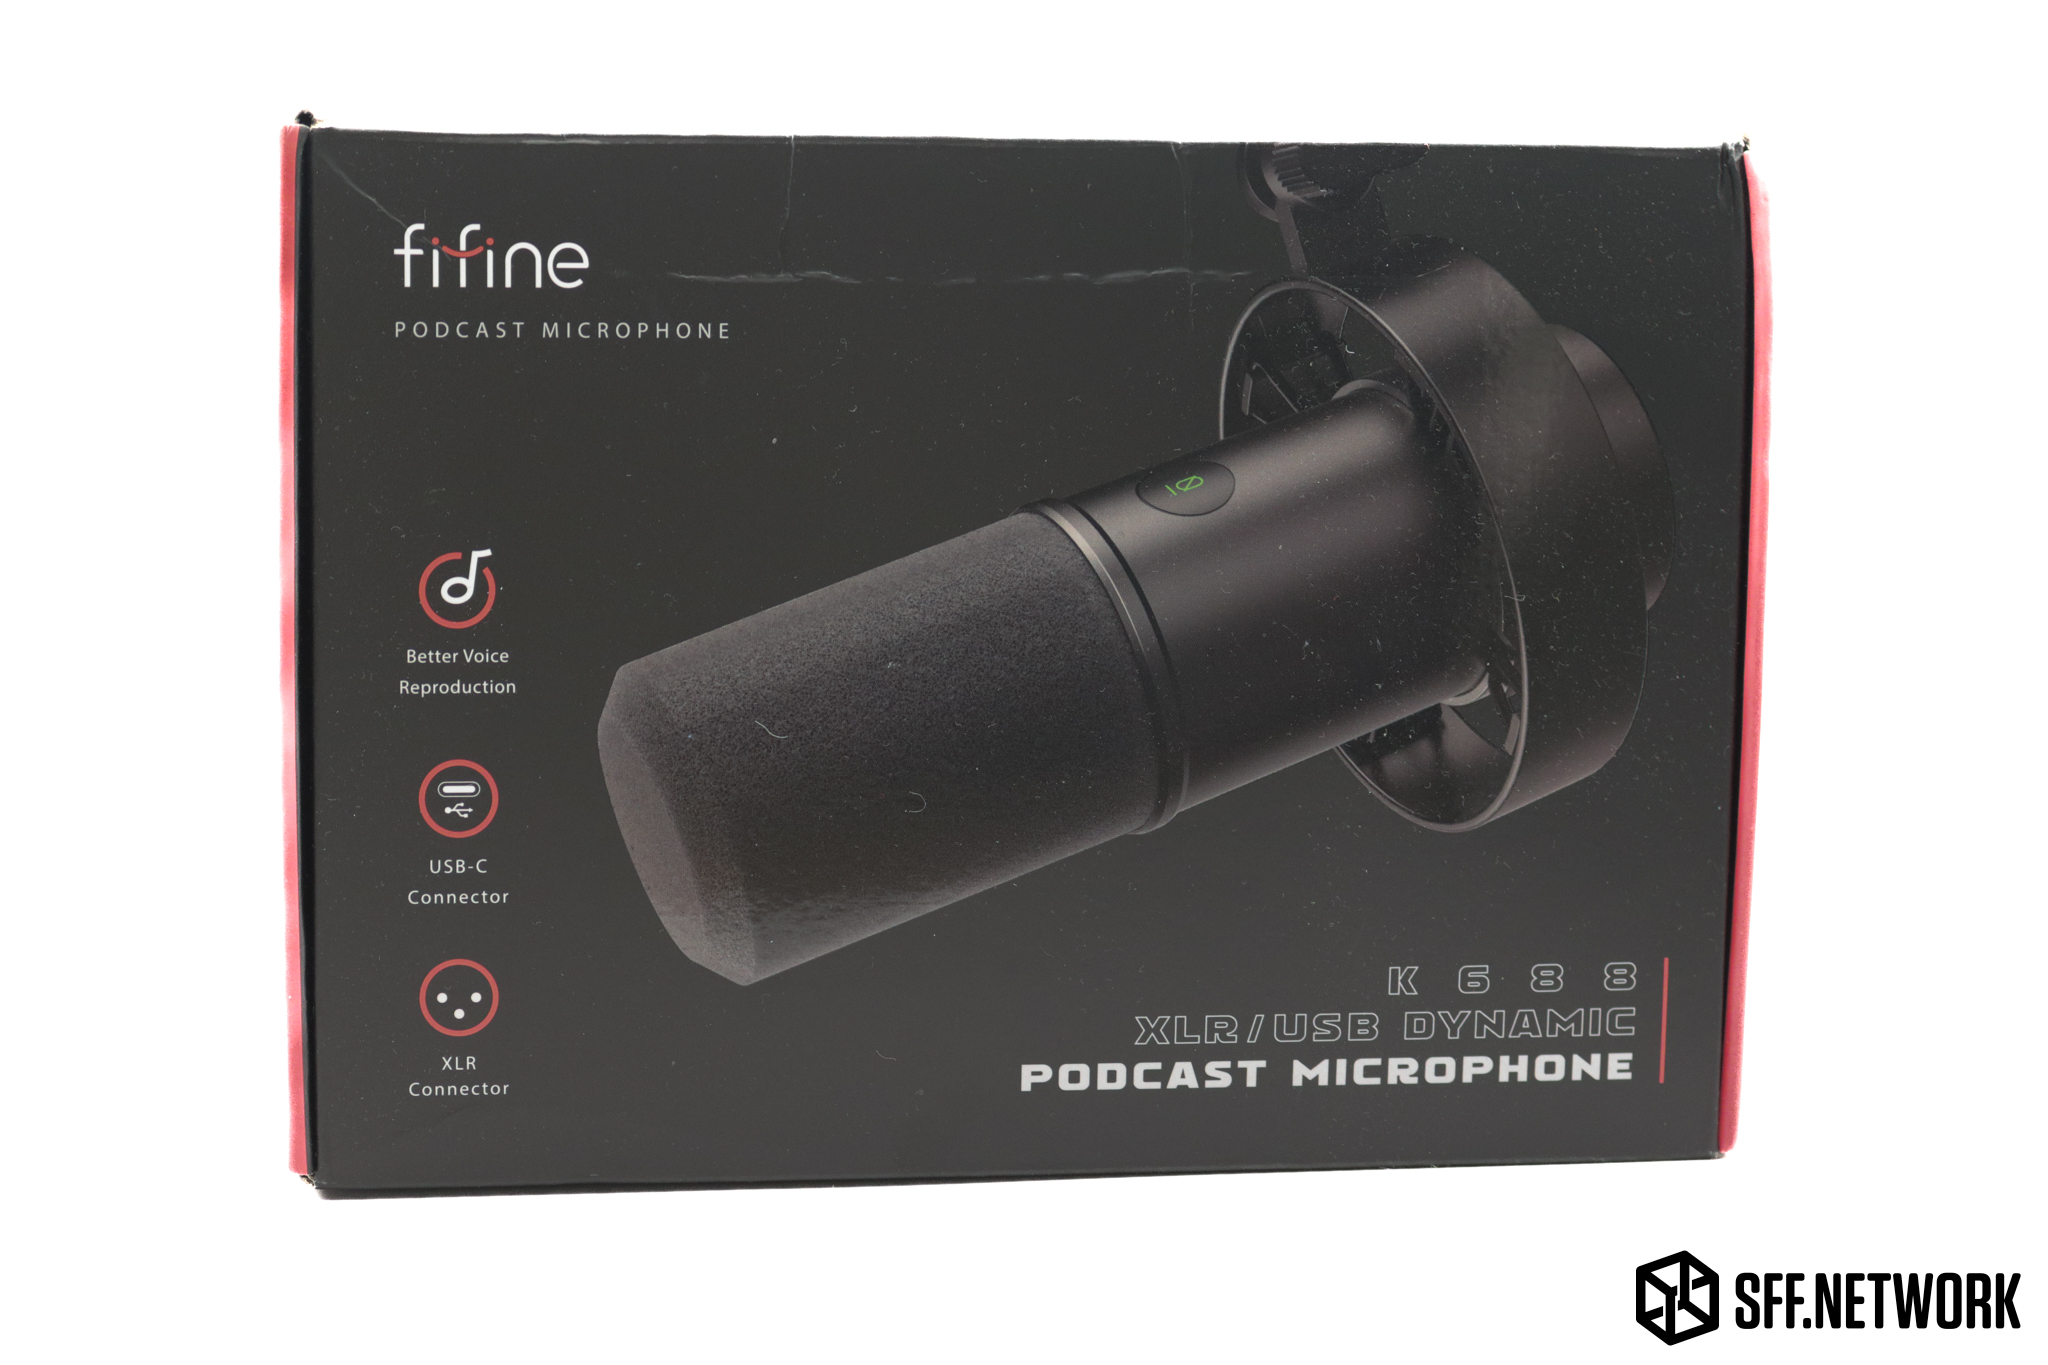 Fifine K688 Unboxing: Your Affordable Gateway to Studio-Quality Sound! 